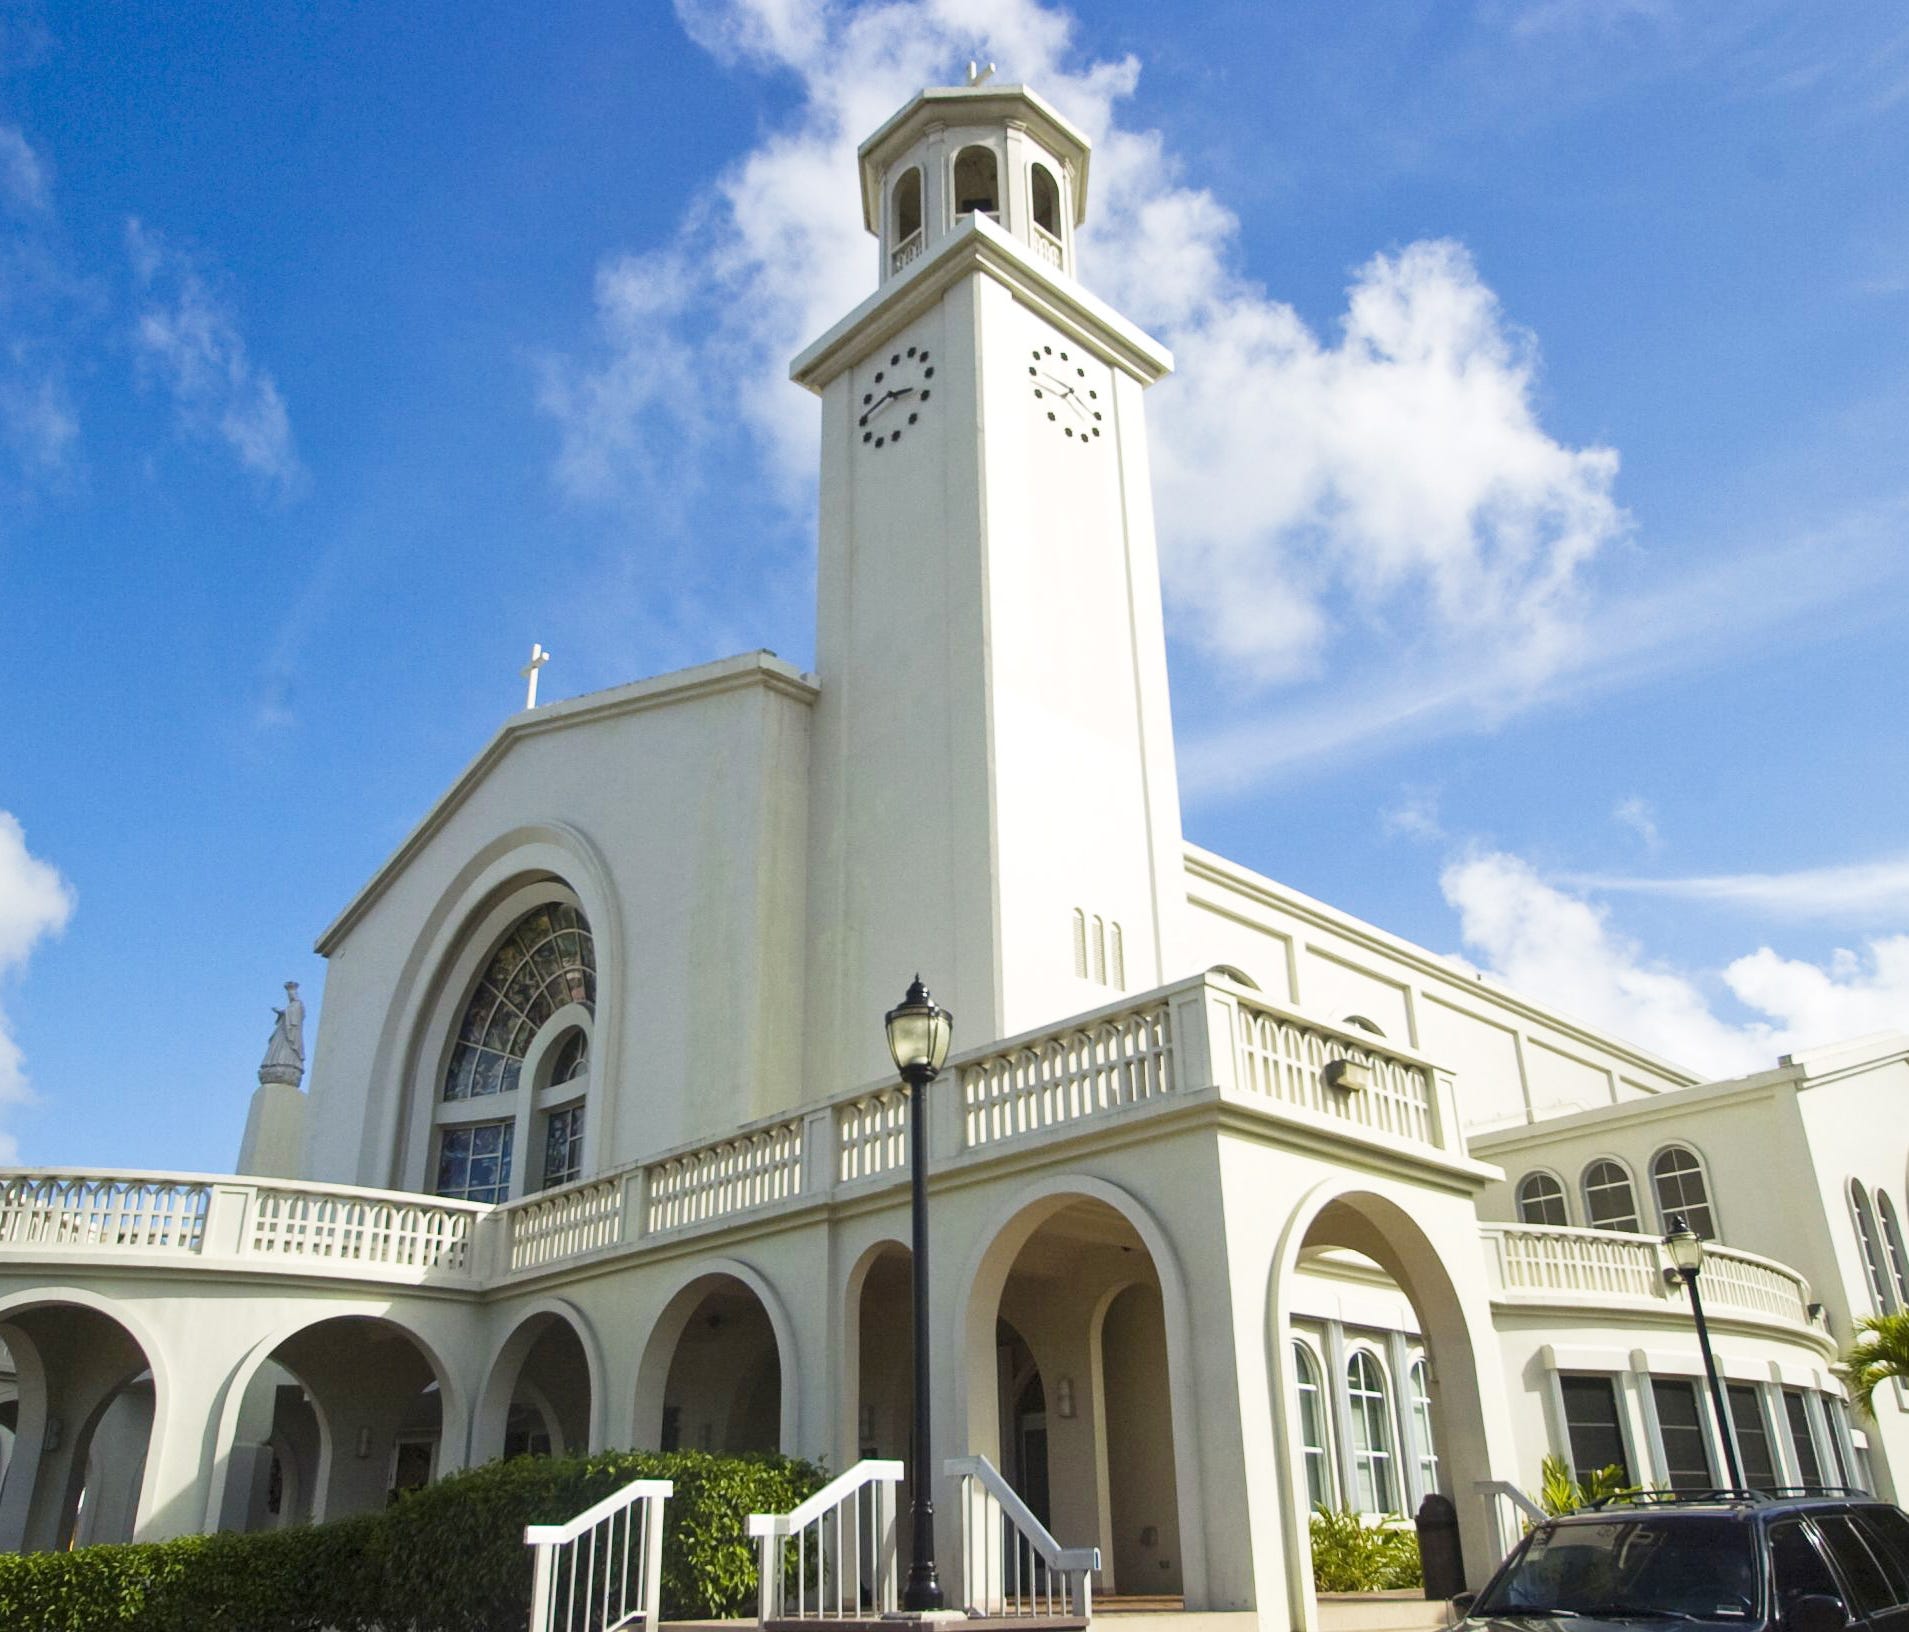 GUAM PRIEST SCANDAL    The Dulce Nombre de Maria Cathedral-Basilica in Hagatna is shown in this file photo.   An U.S. District Court judge has approved attorneys' request to consolidate as many as 25 clergy sex abuse lawsuits.